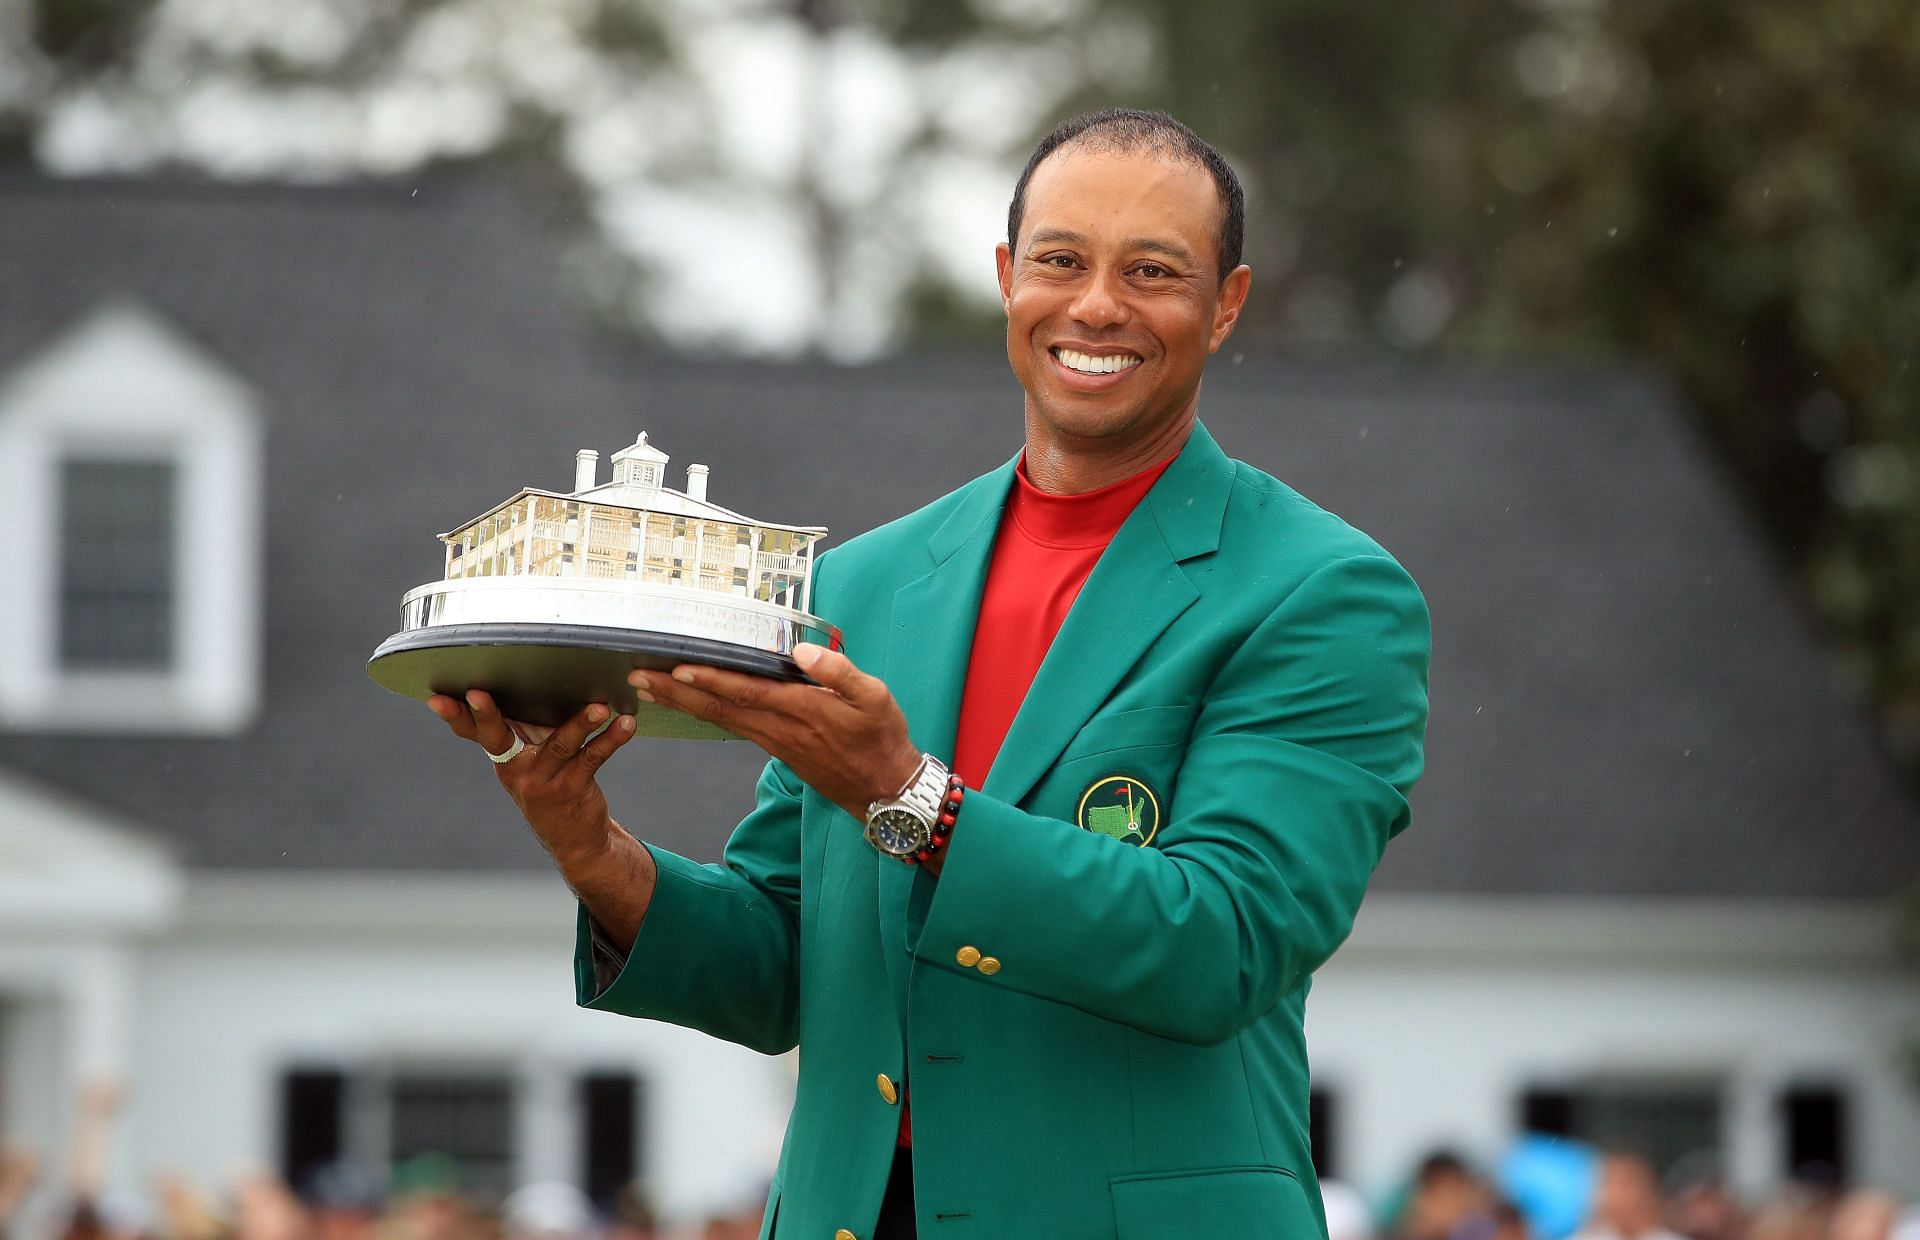 Tiger Woods won The Masters in 2019